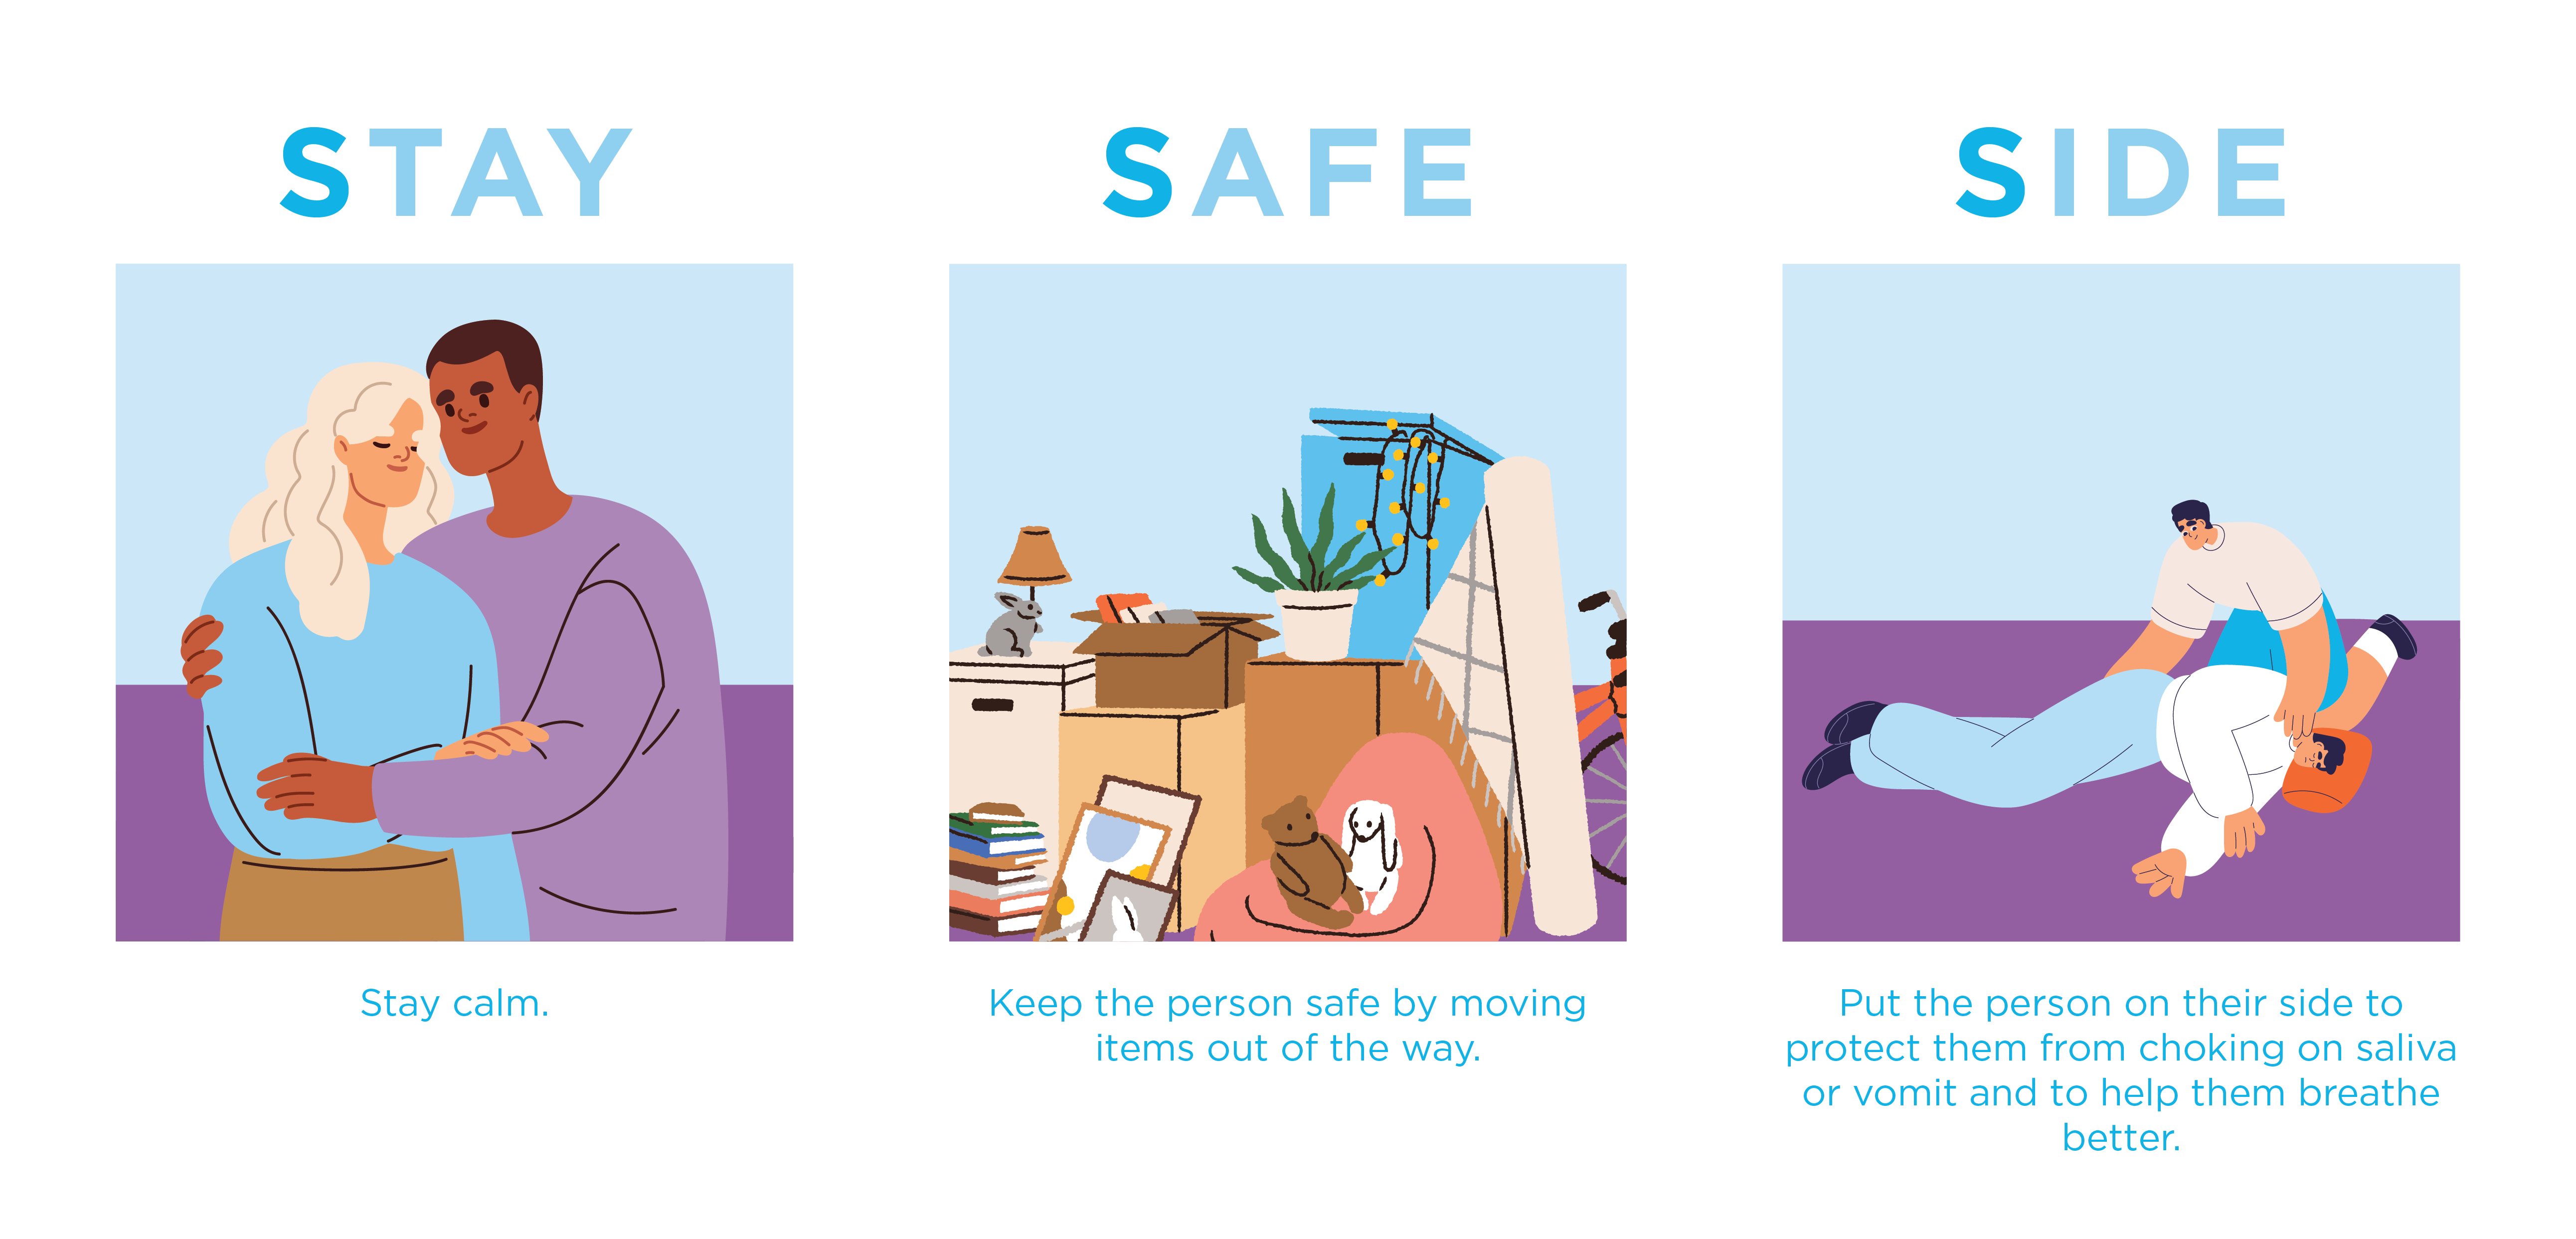 Stay, Safe, Hide infographic